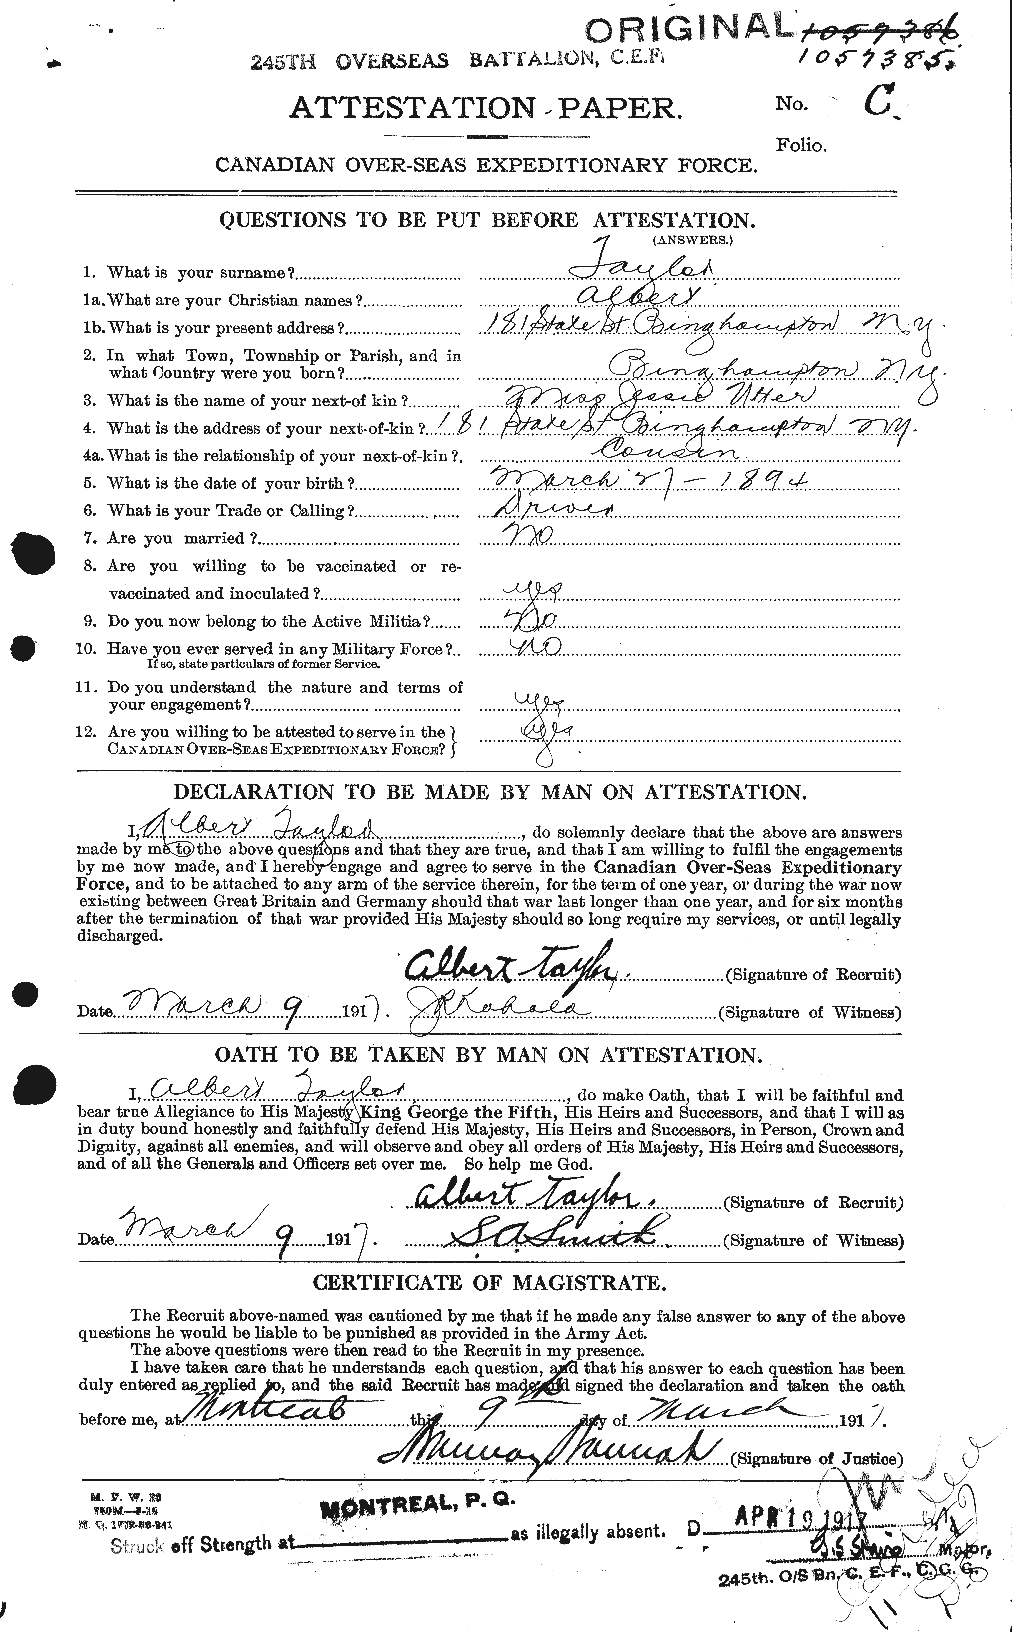 Personnel Records of the First World War - CEF 626081a